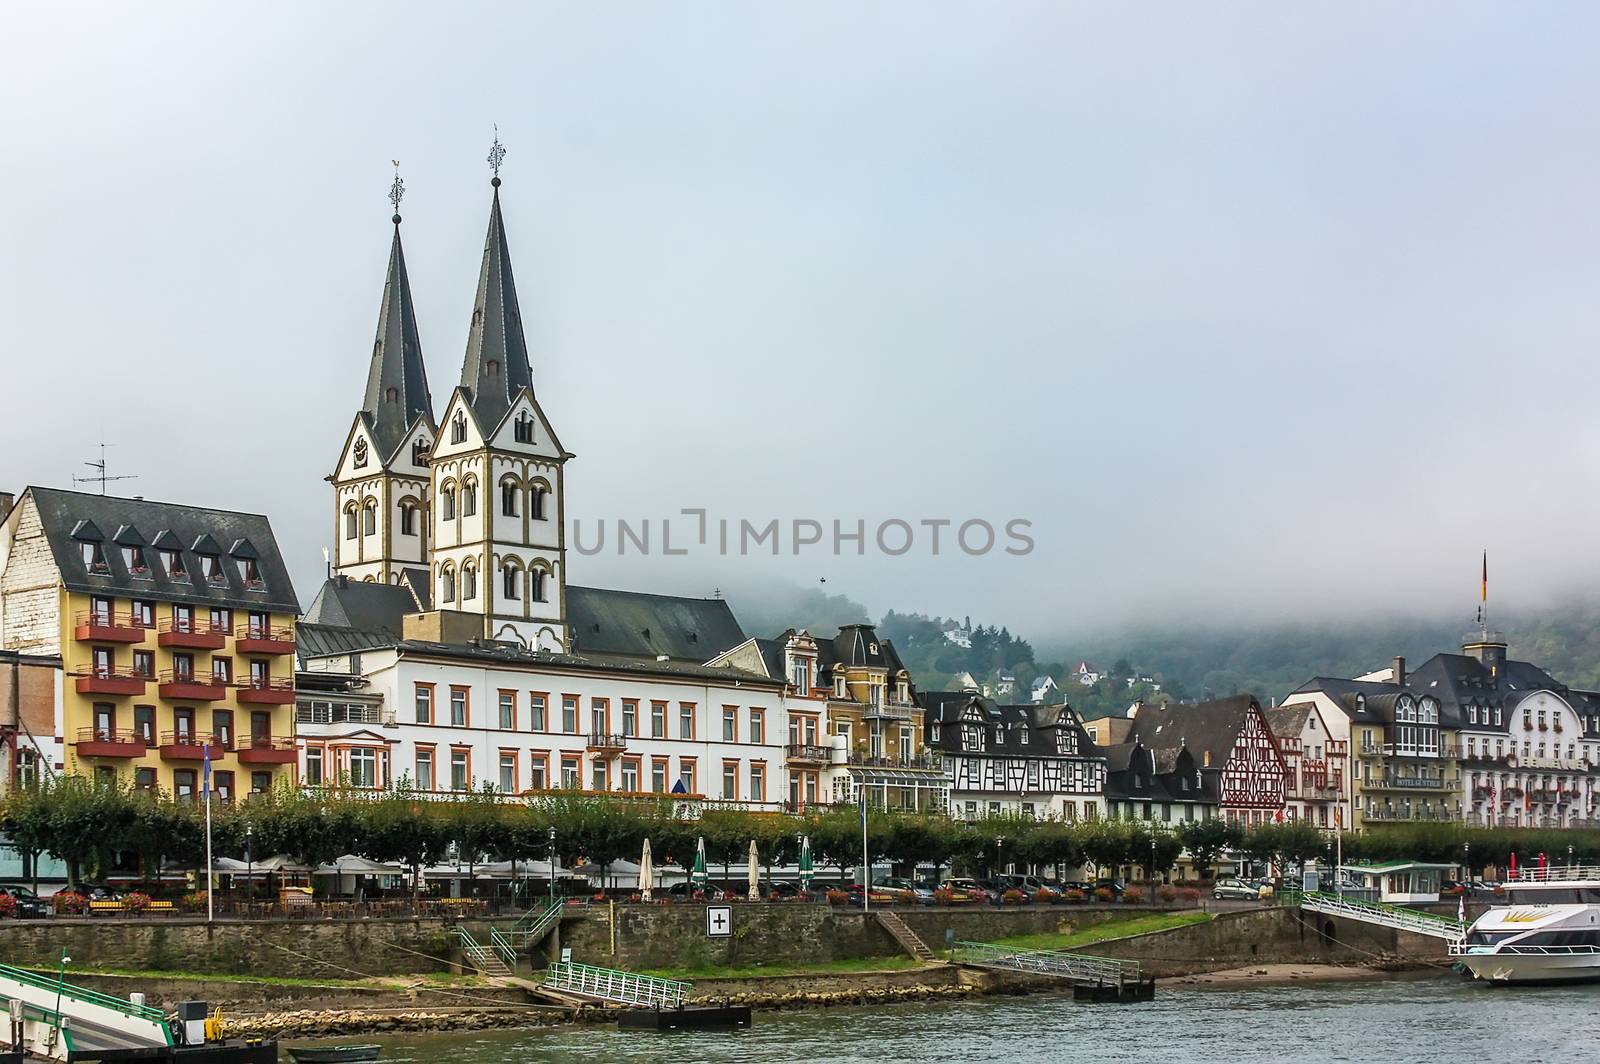 Boppard lies on the upper Middle Rhine, often known as the Rhine Gorge. Germany